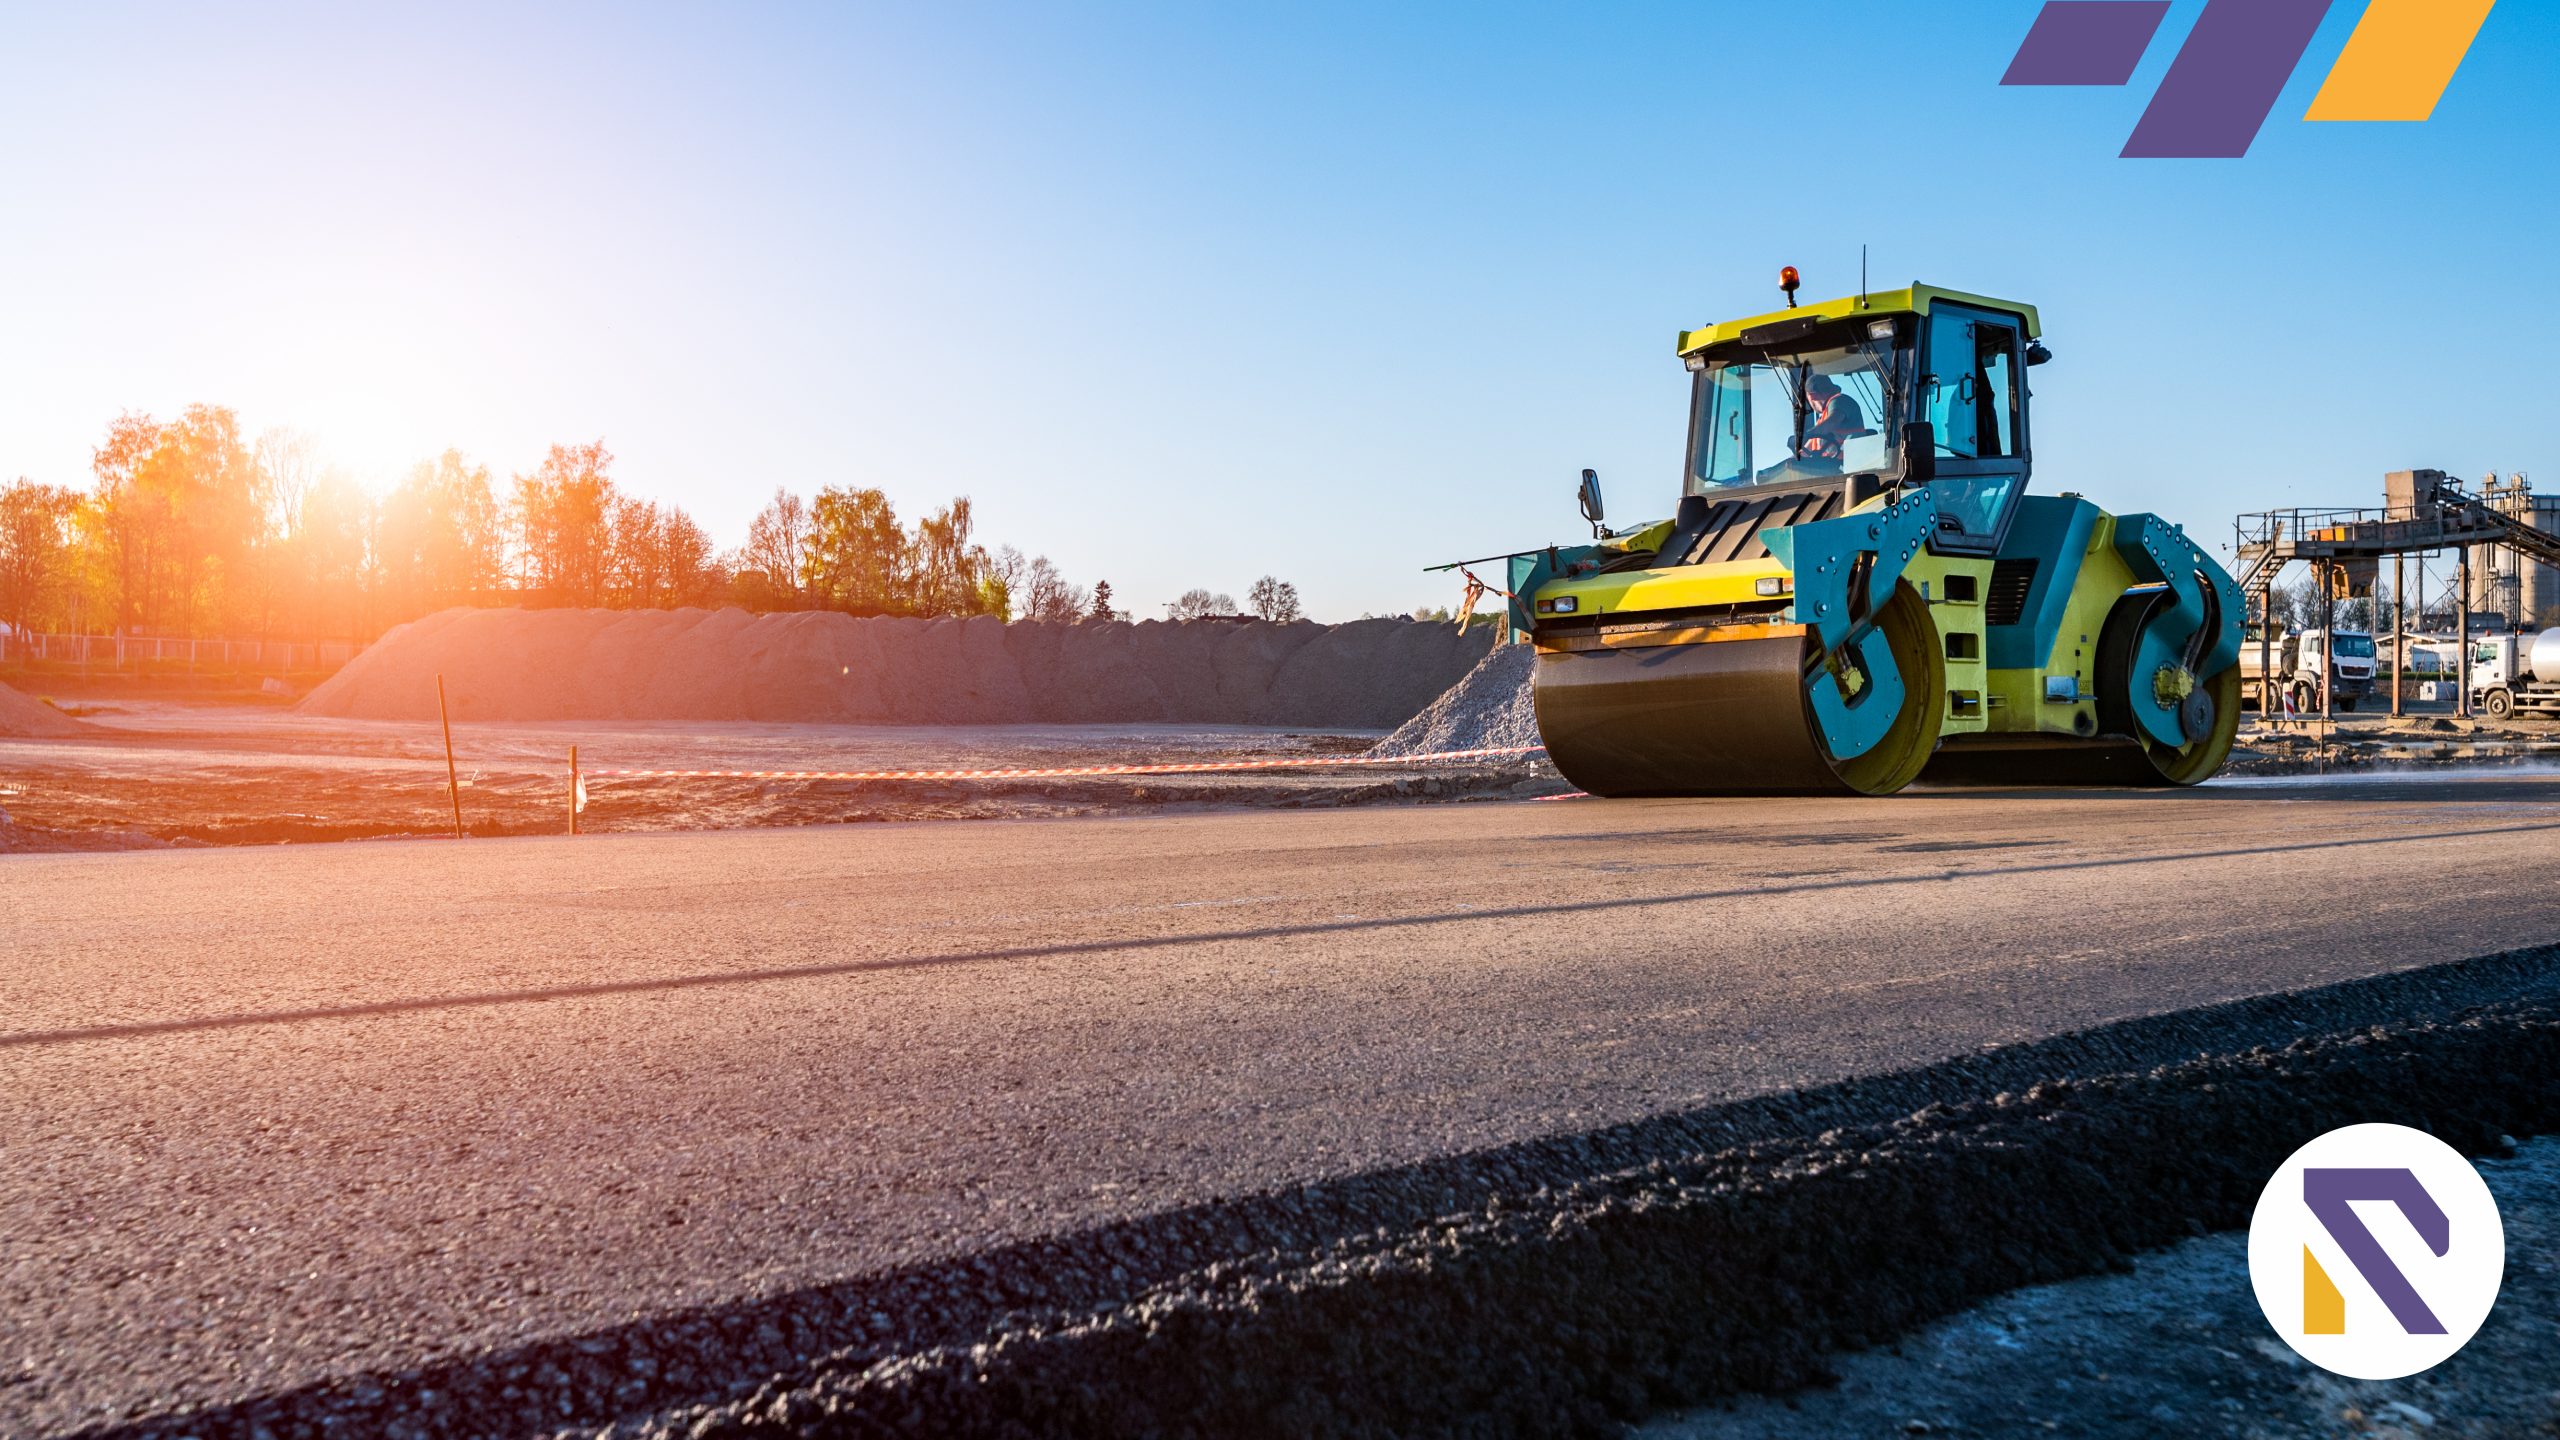 World Bank is exploring new options to construct roads with plastic waste-Realtorspk